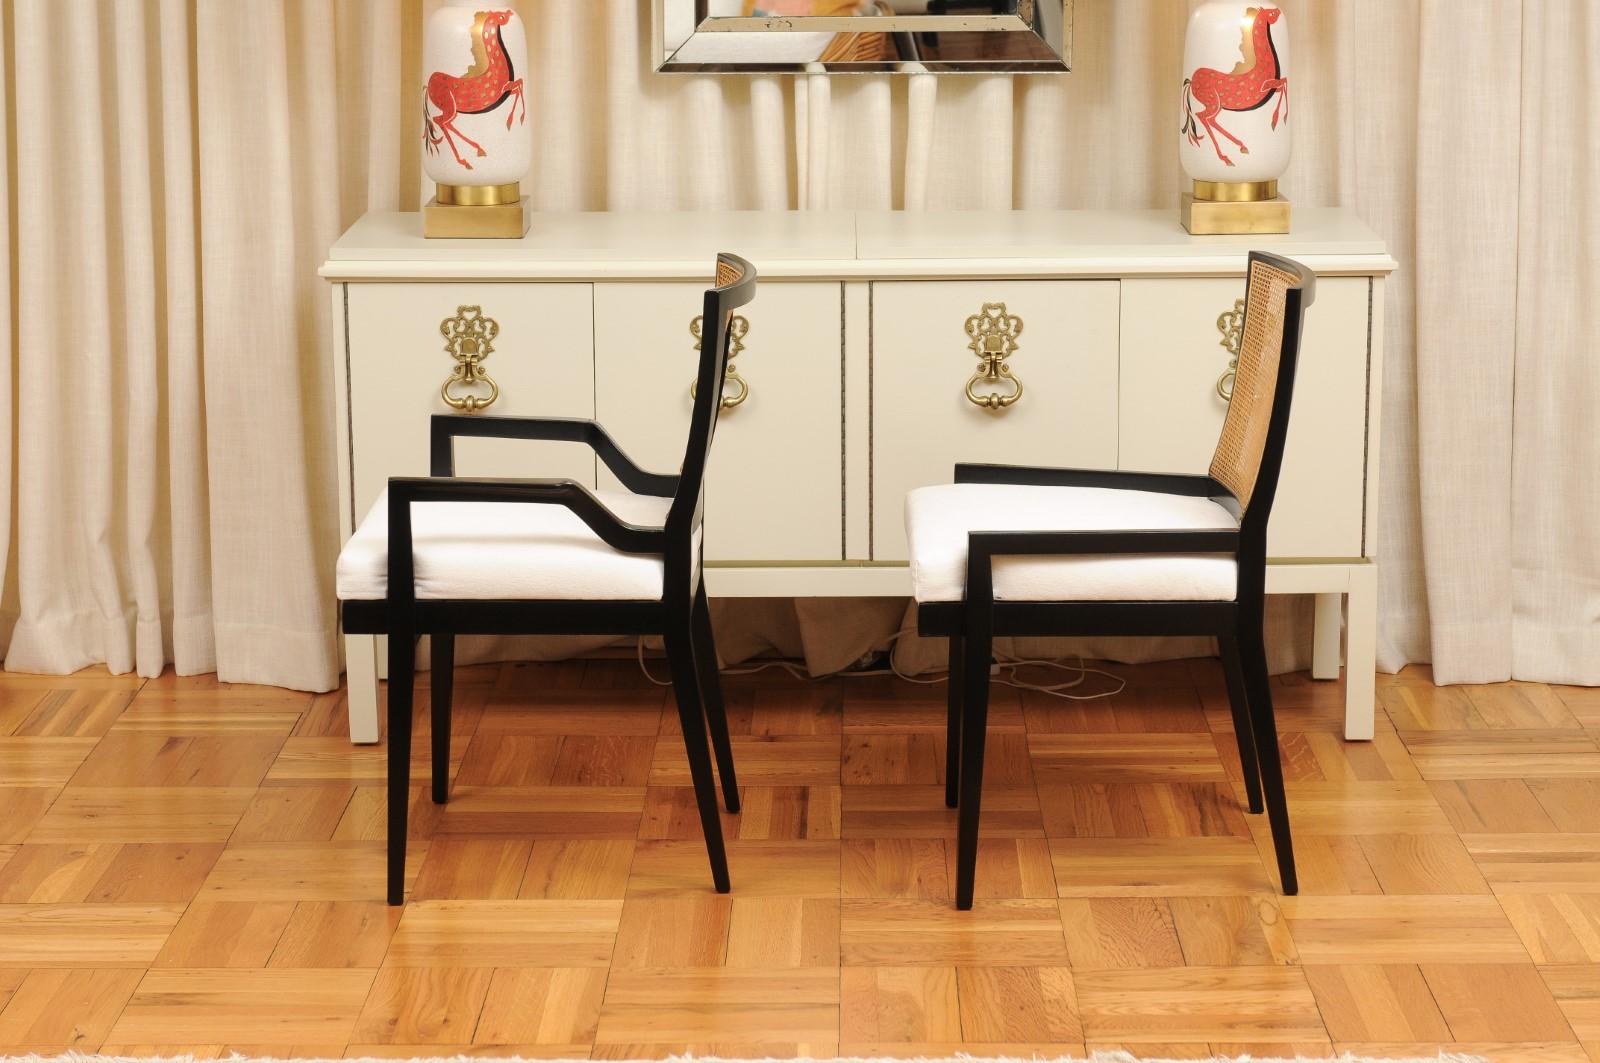 Stellar Set of 14 Black Lacquer Cane Chairs by Michael Taylor, circa 1960 For Sale 8